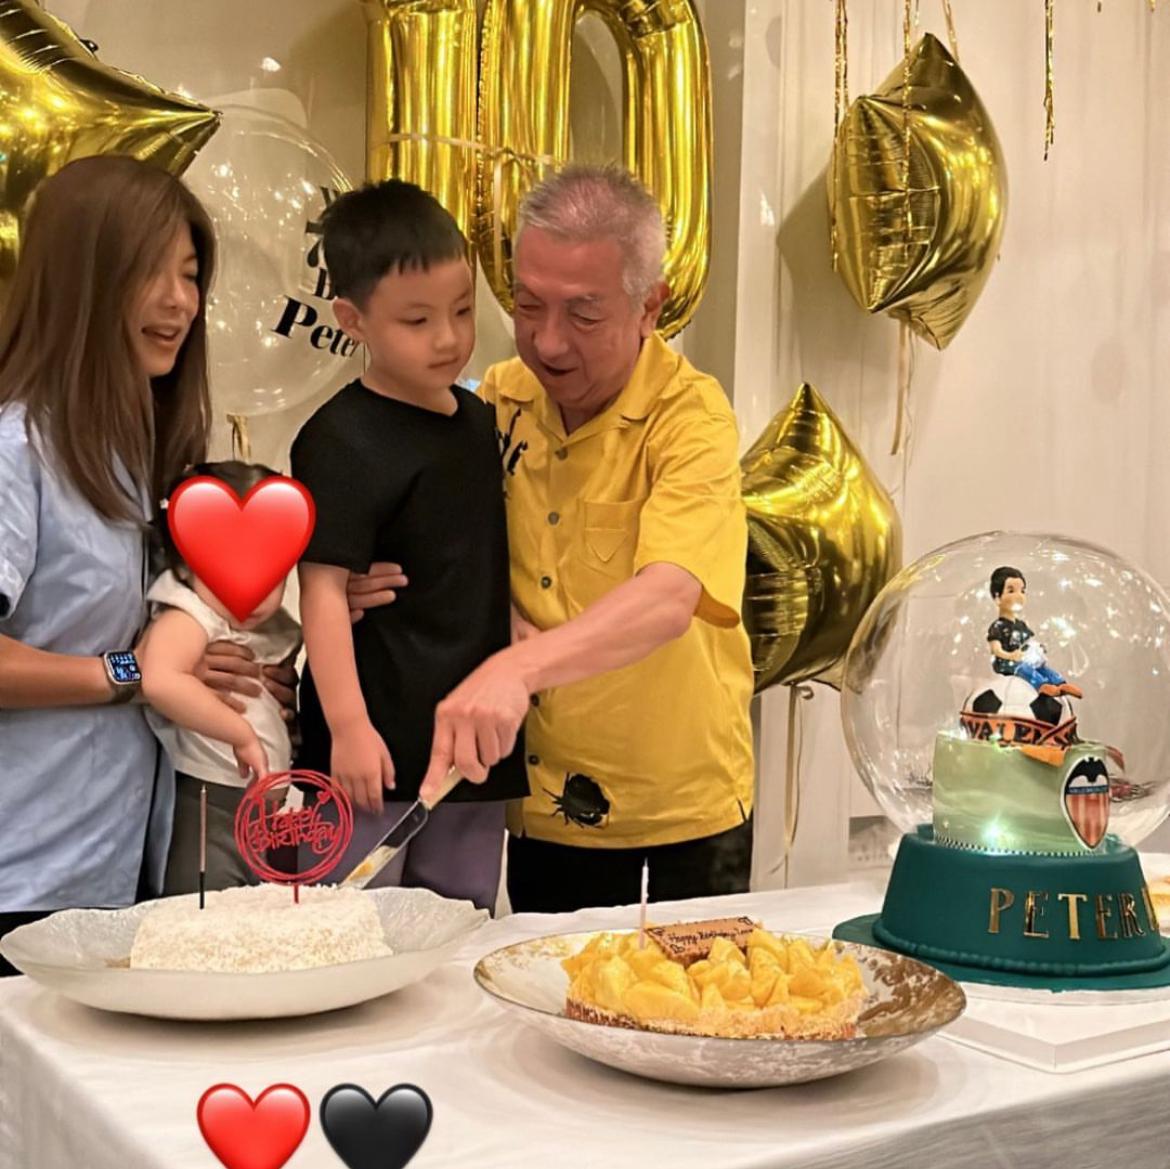 Peter Lim reappears with a Valencia birthday cake, hours before the protest against him